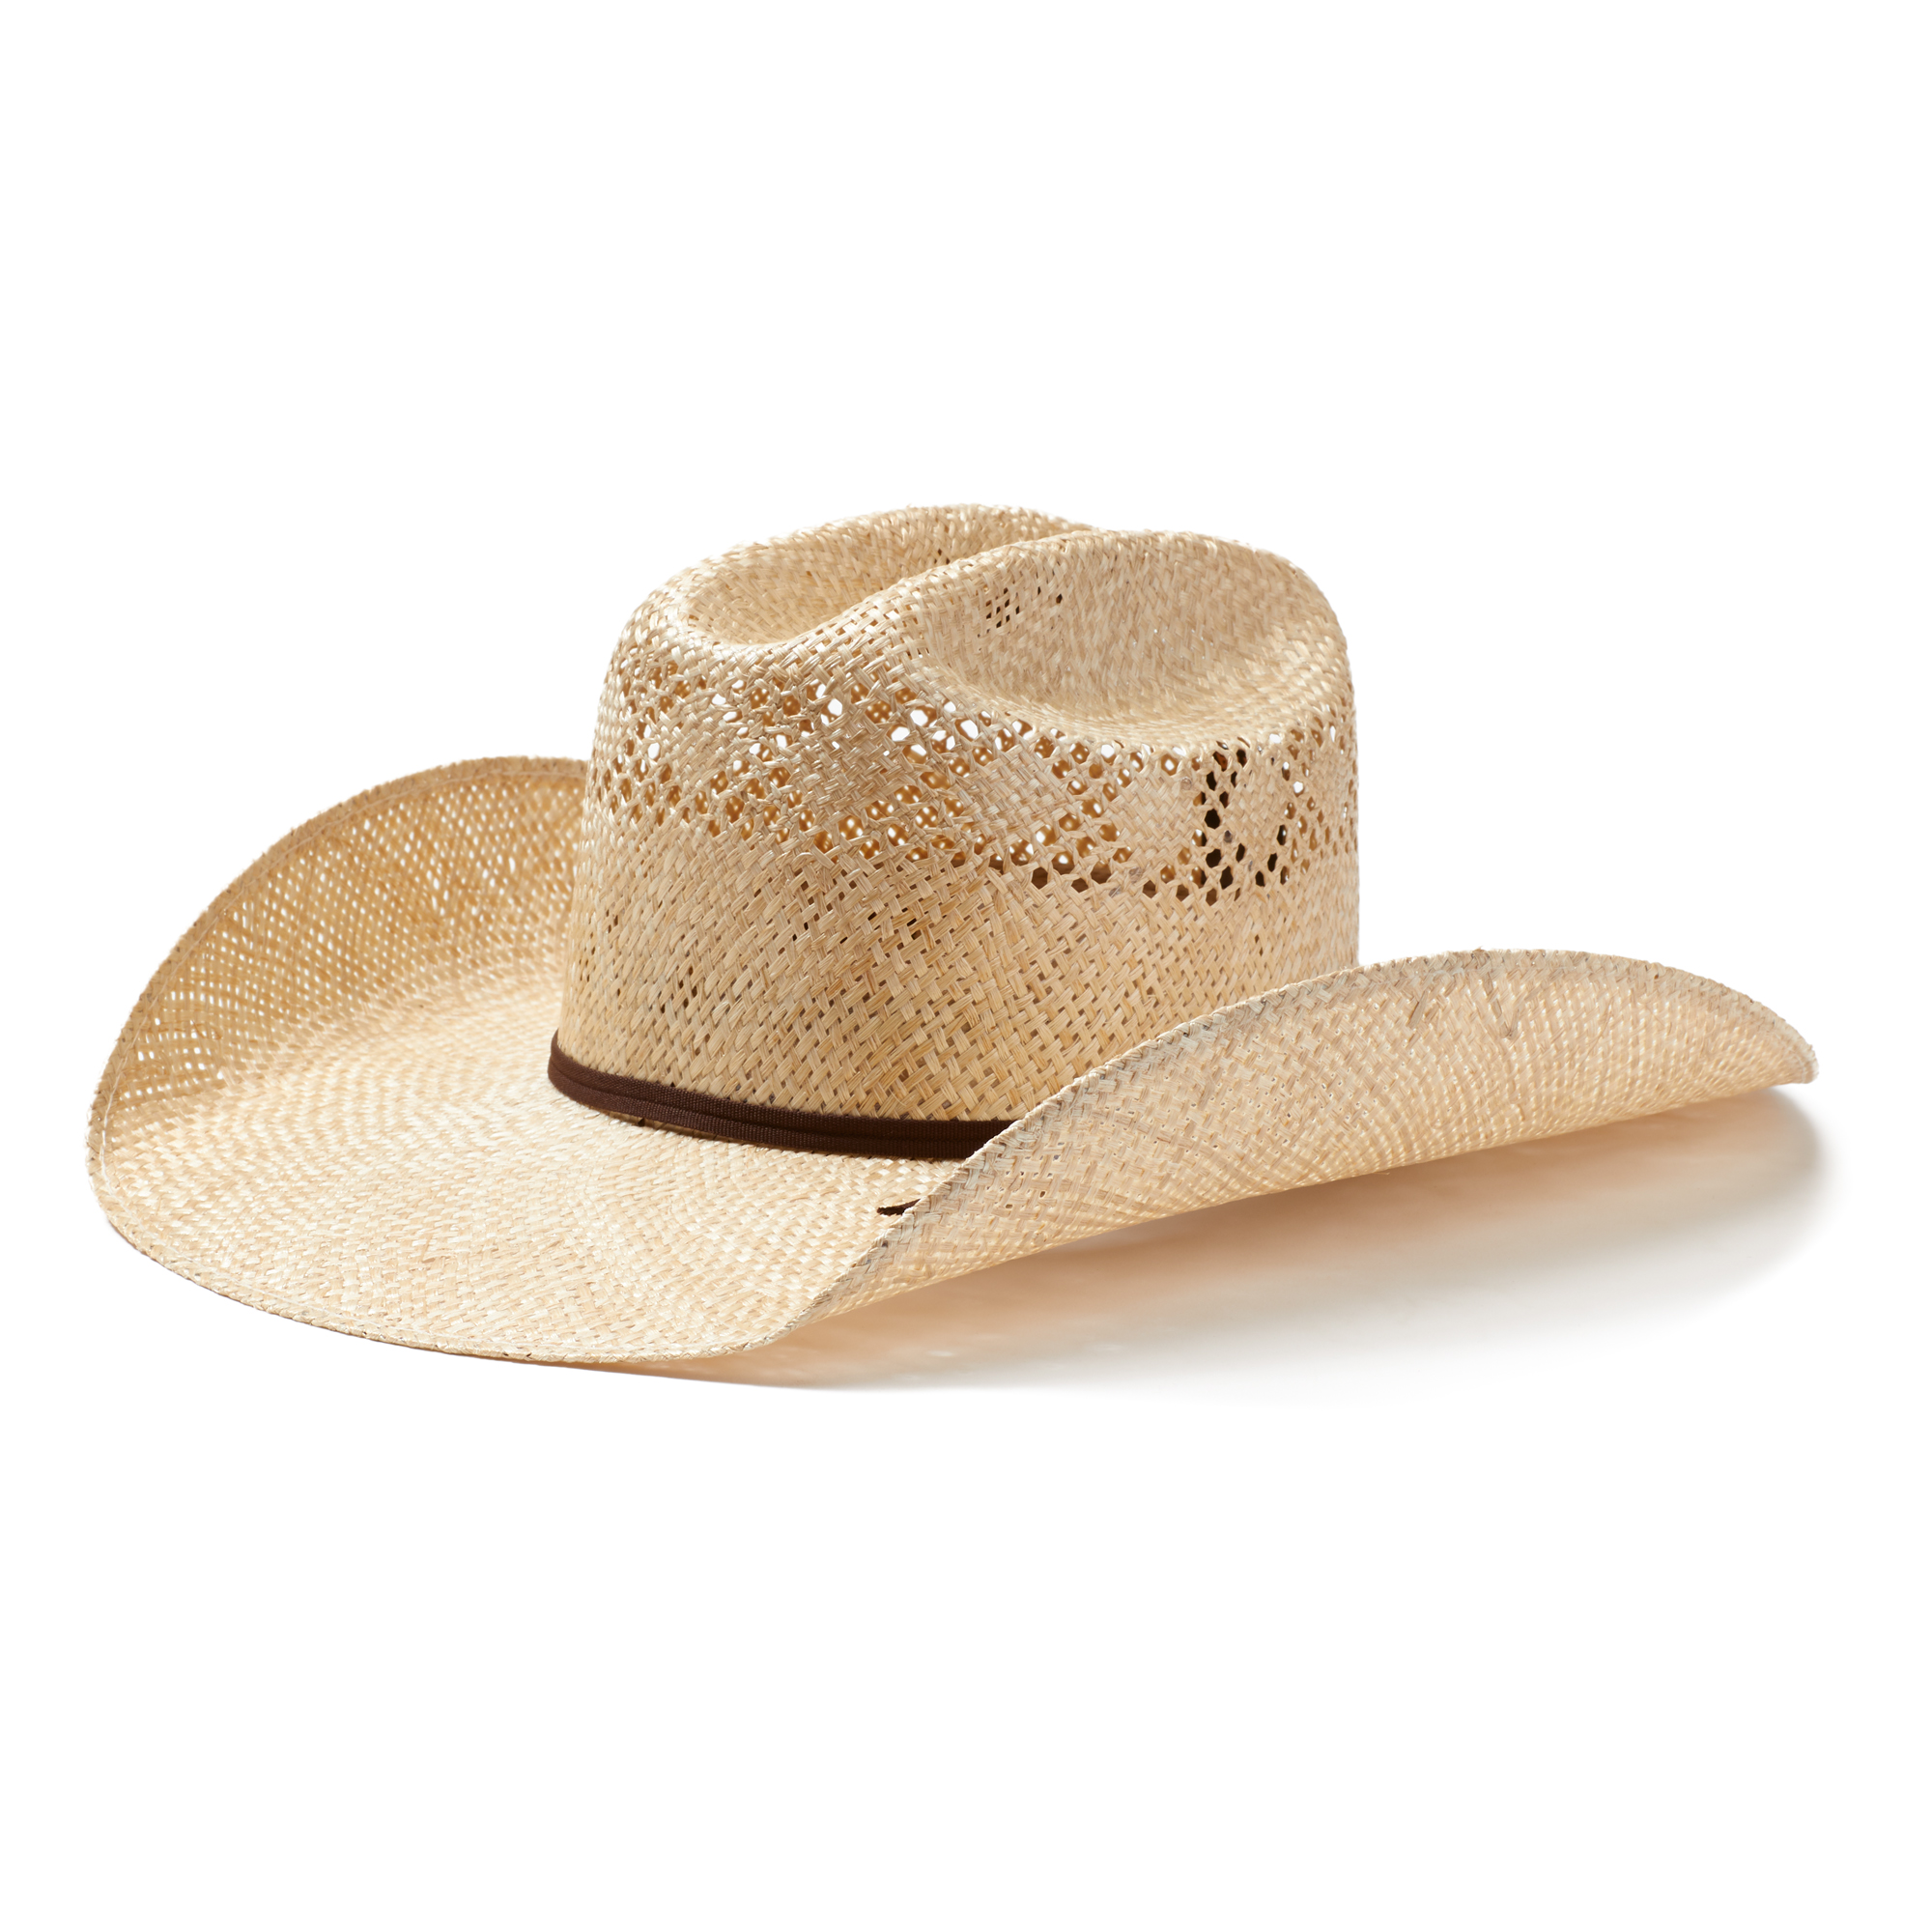 Ariat / Twisted Weave Straw Hat